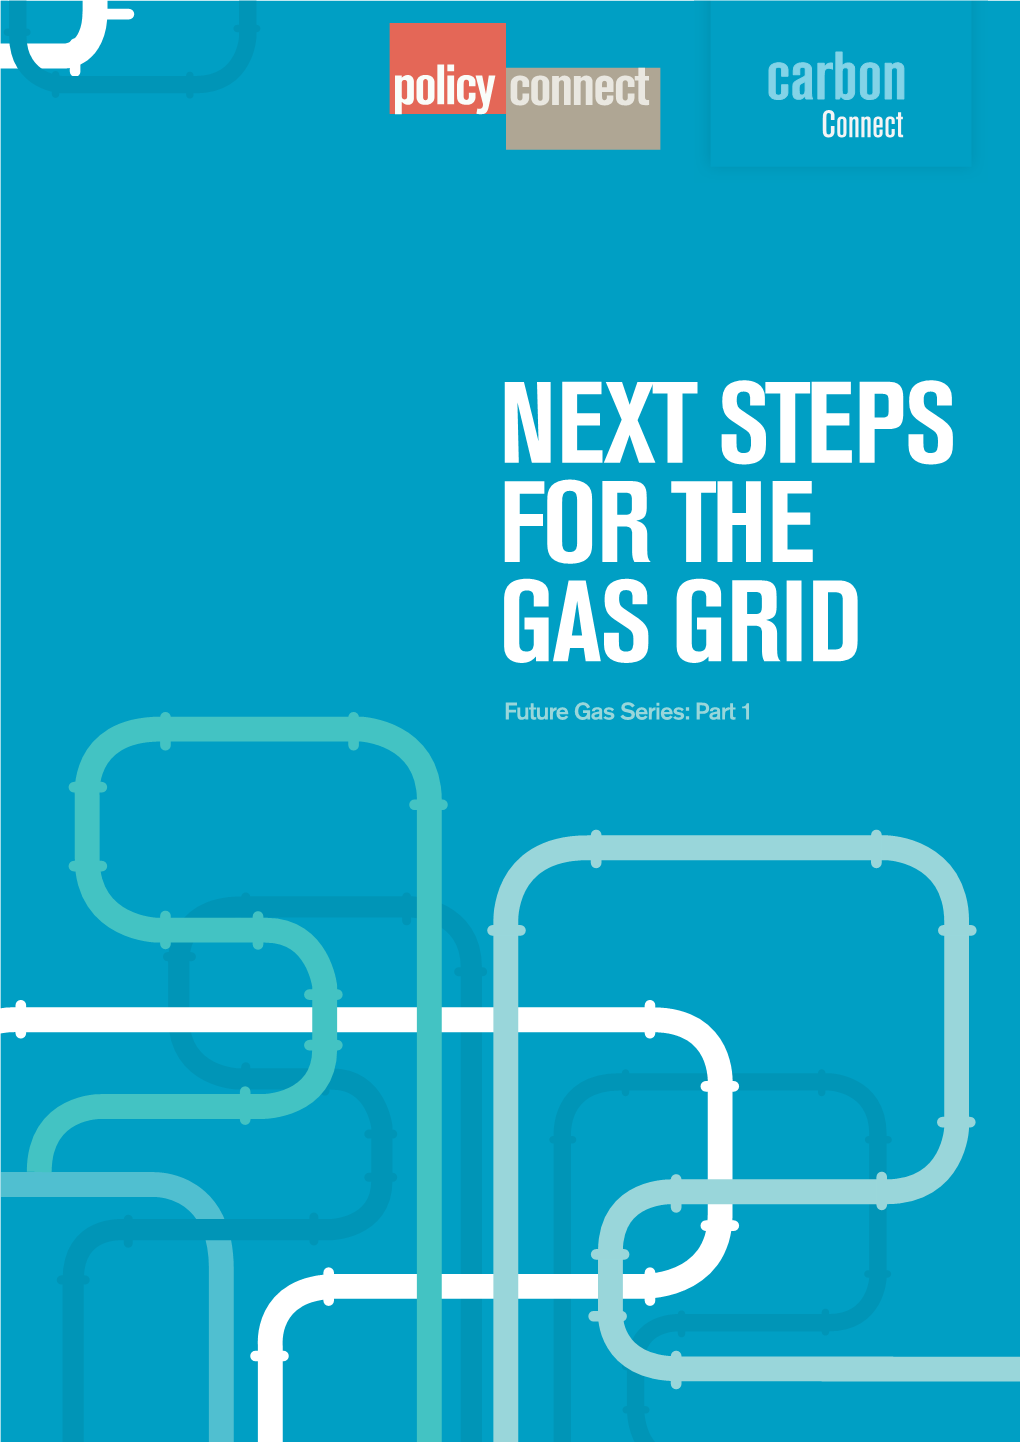 NEXT STEPS for the GAS GRID Future Gas Series: Part 1 Future Gas Series Part 1: Next Steps for the Gas Grid 1